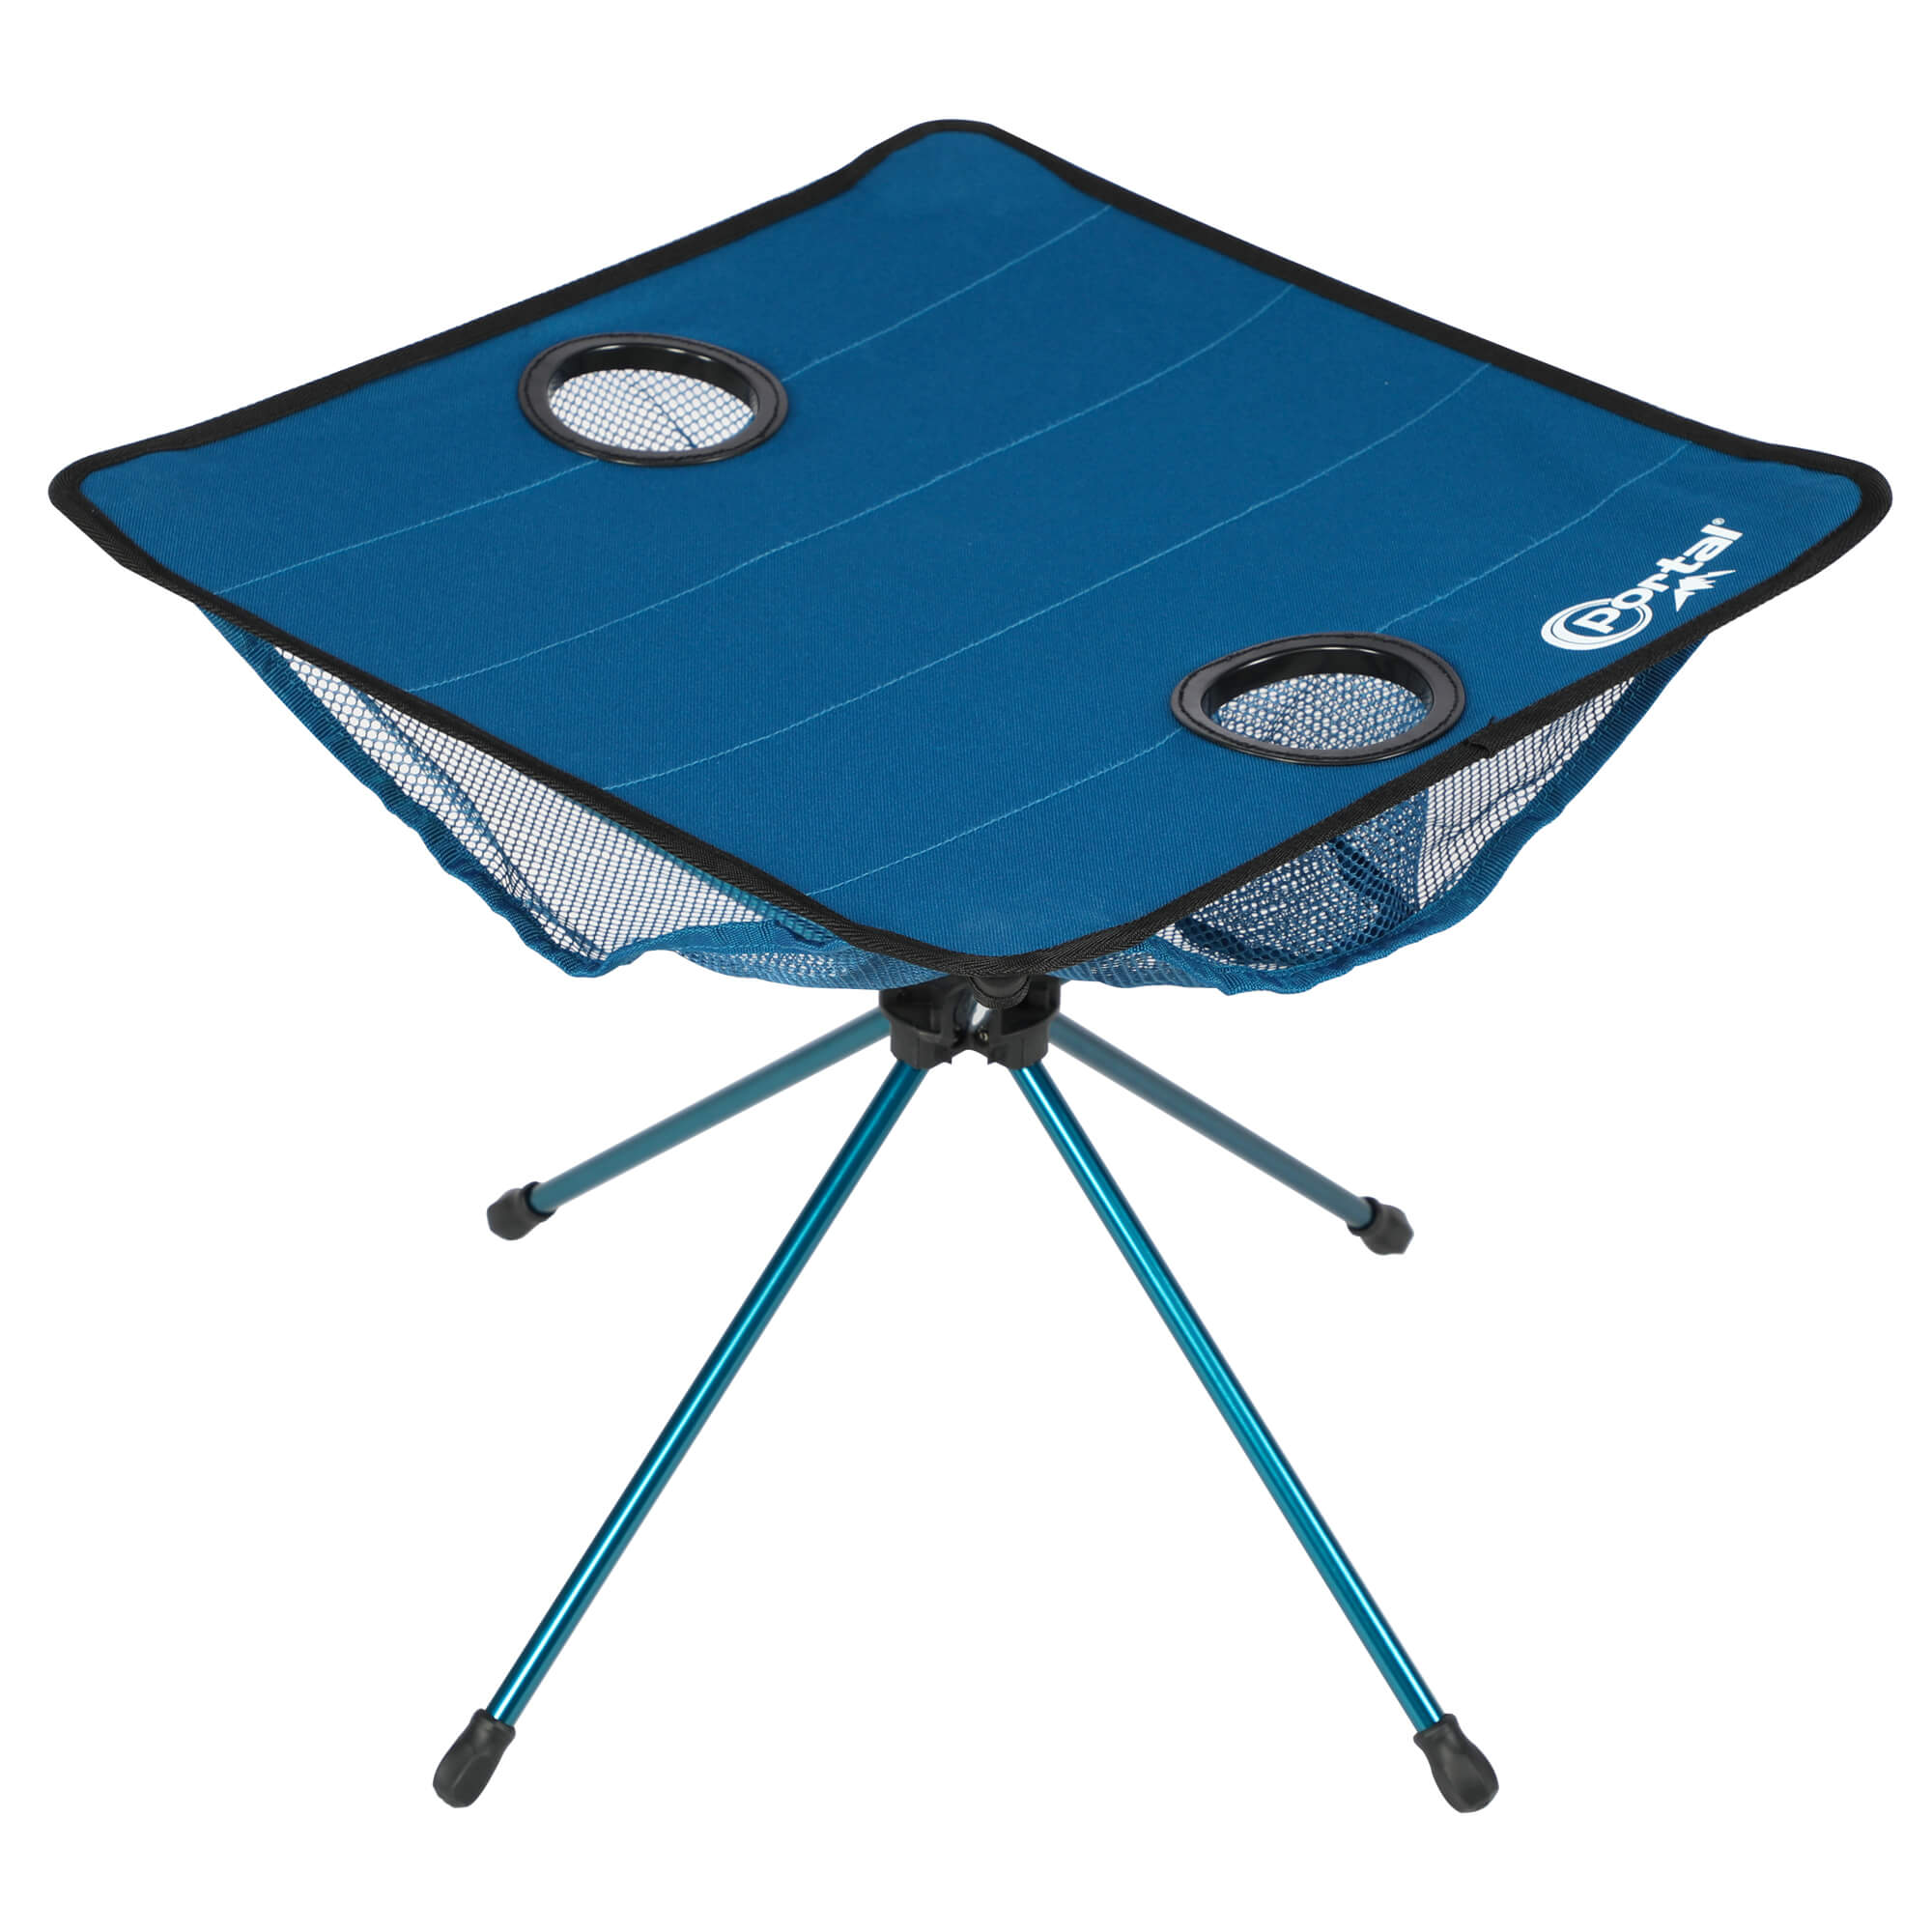 Ultralight Portable Backpacking Table | Portal Outdoors